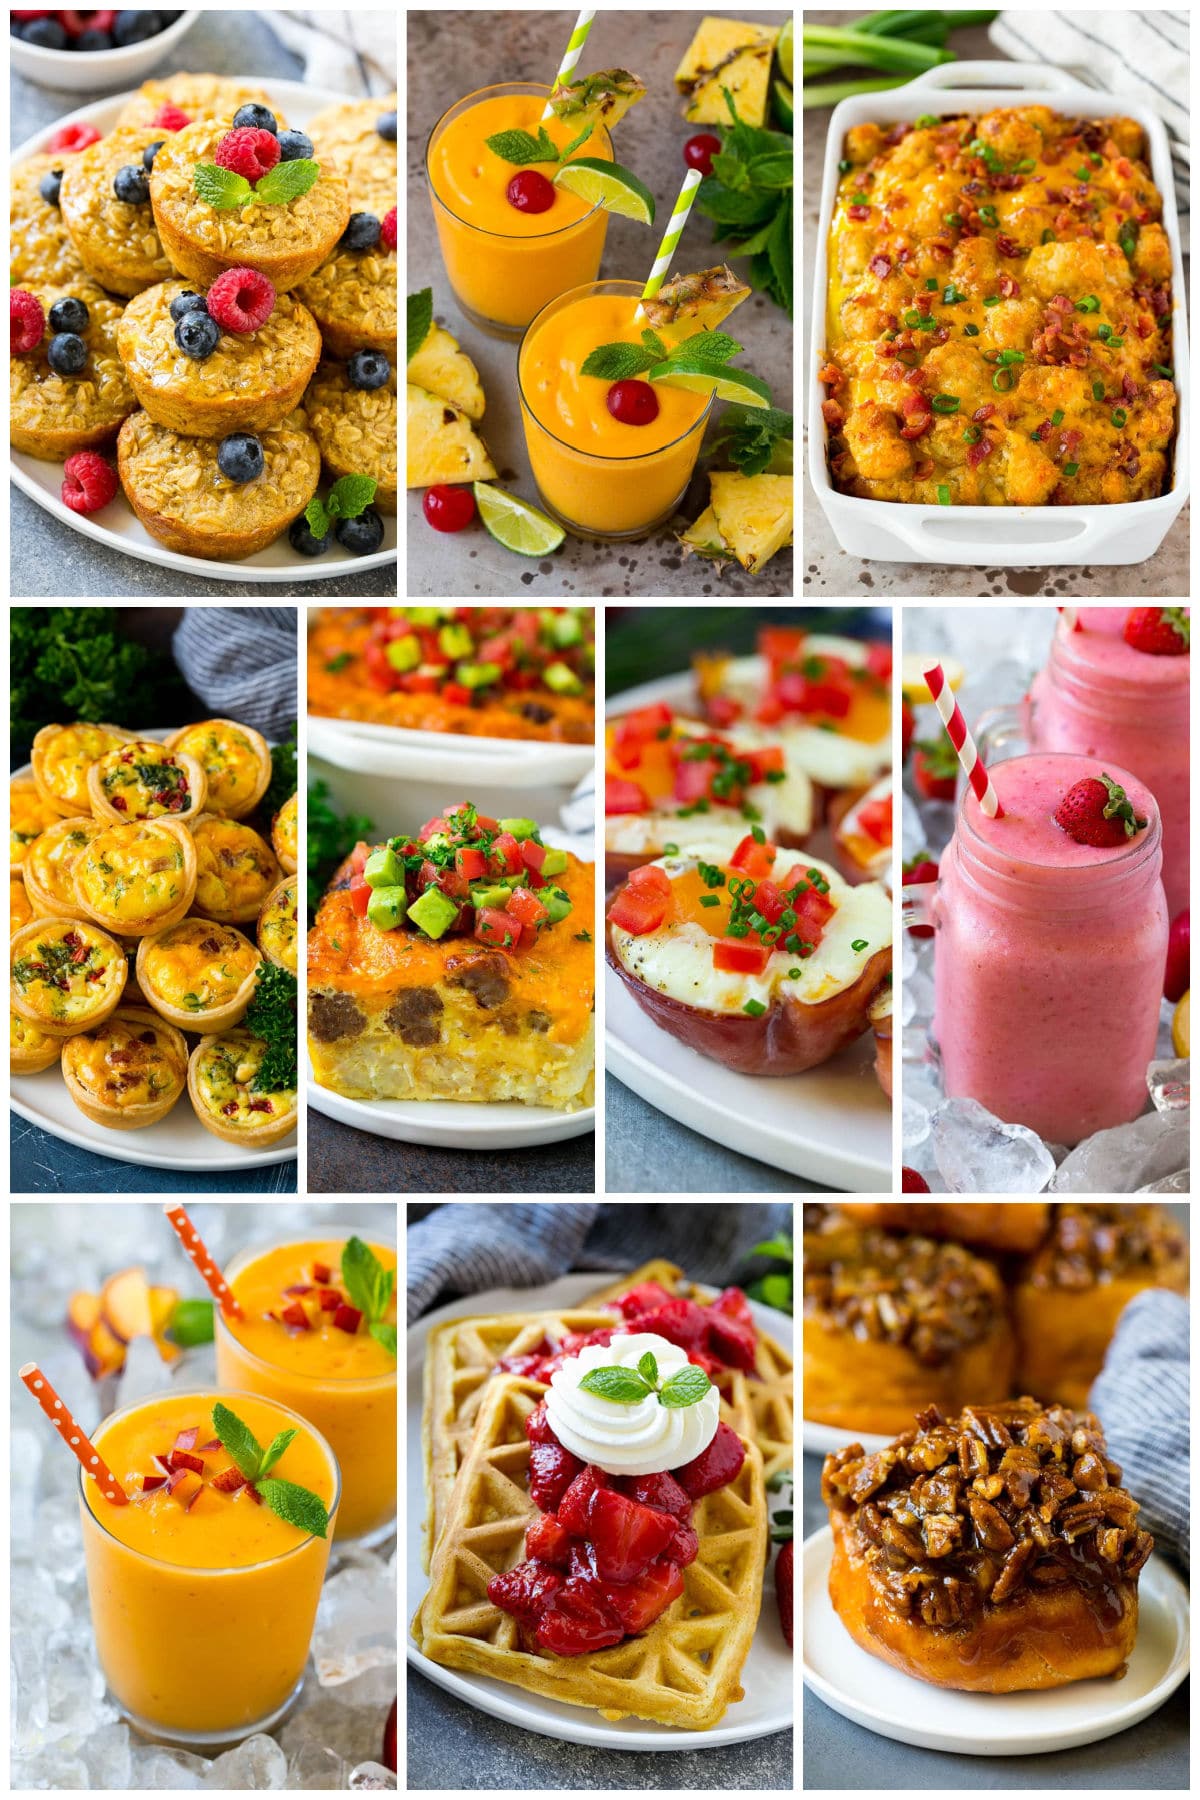 A group of morning foods like baked oatmeal cups, strawberry waffles and sticky buns.